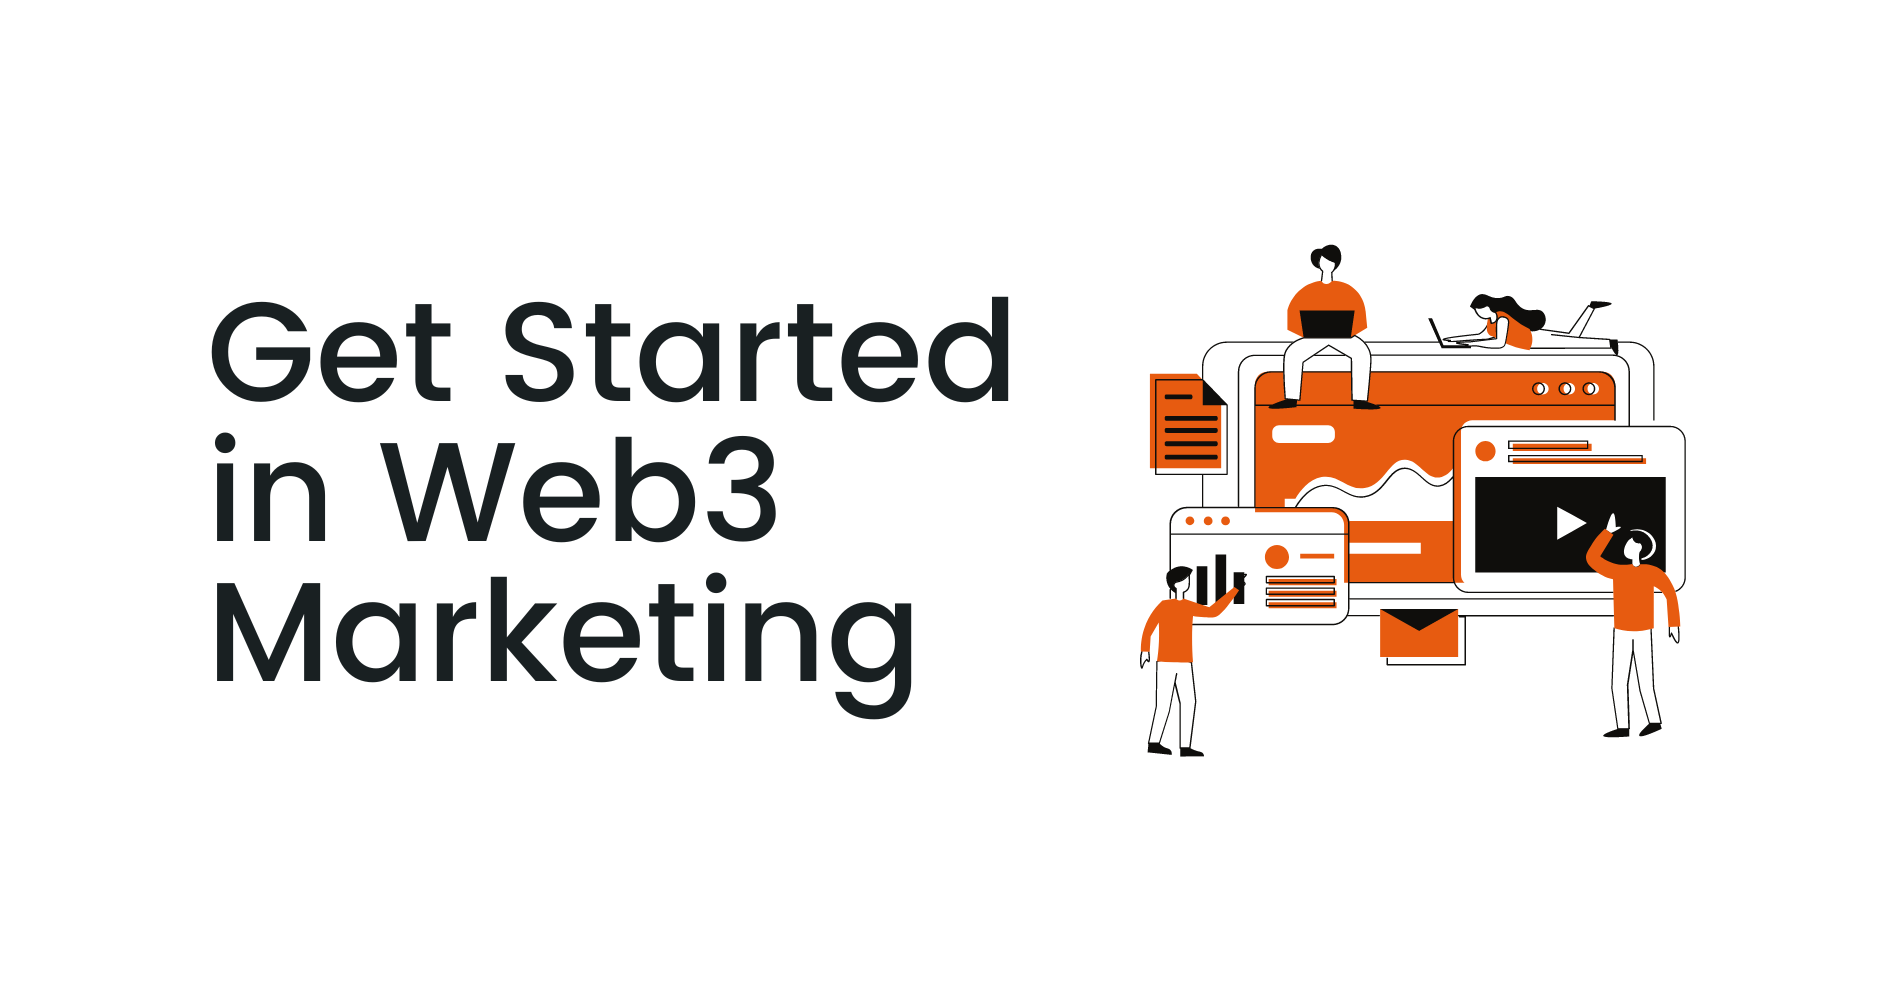 Get Started in Web3 Marketing